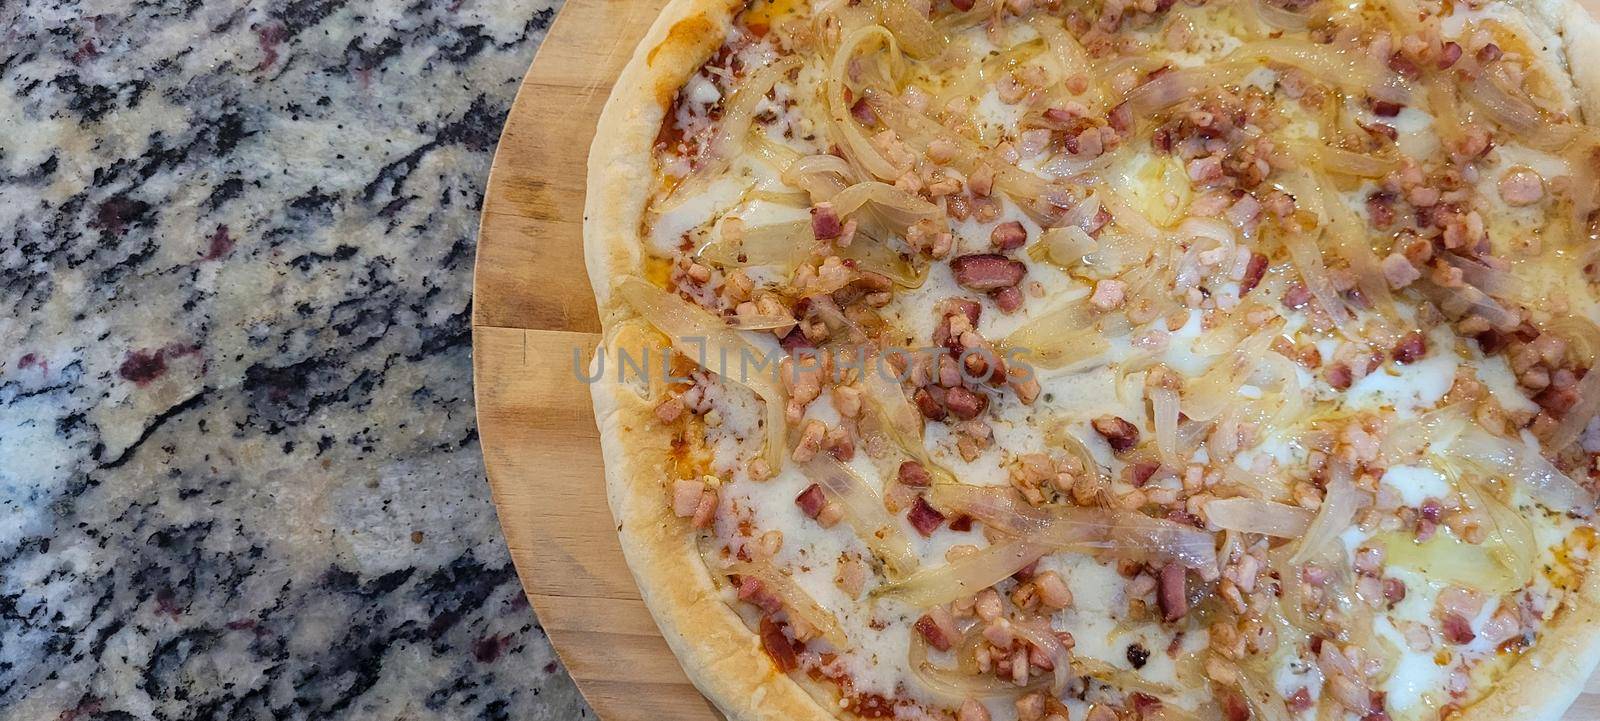 homemade homemade pizza with pasta made with a family recipe and stuffed with bacon, onion, cheese and sauce, great for a family weekend